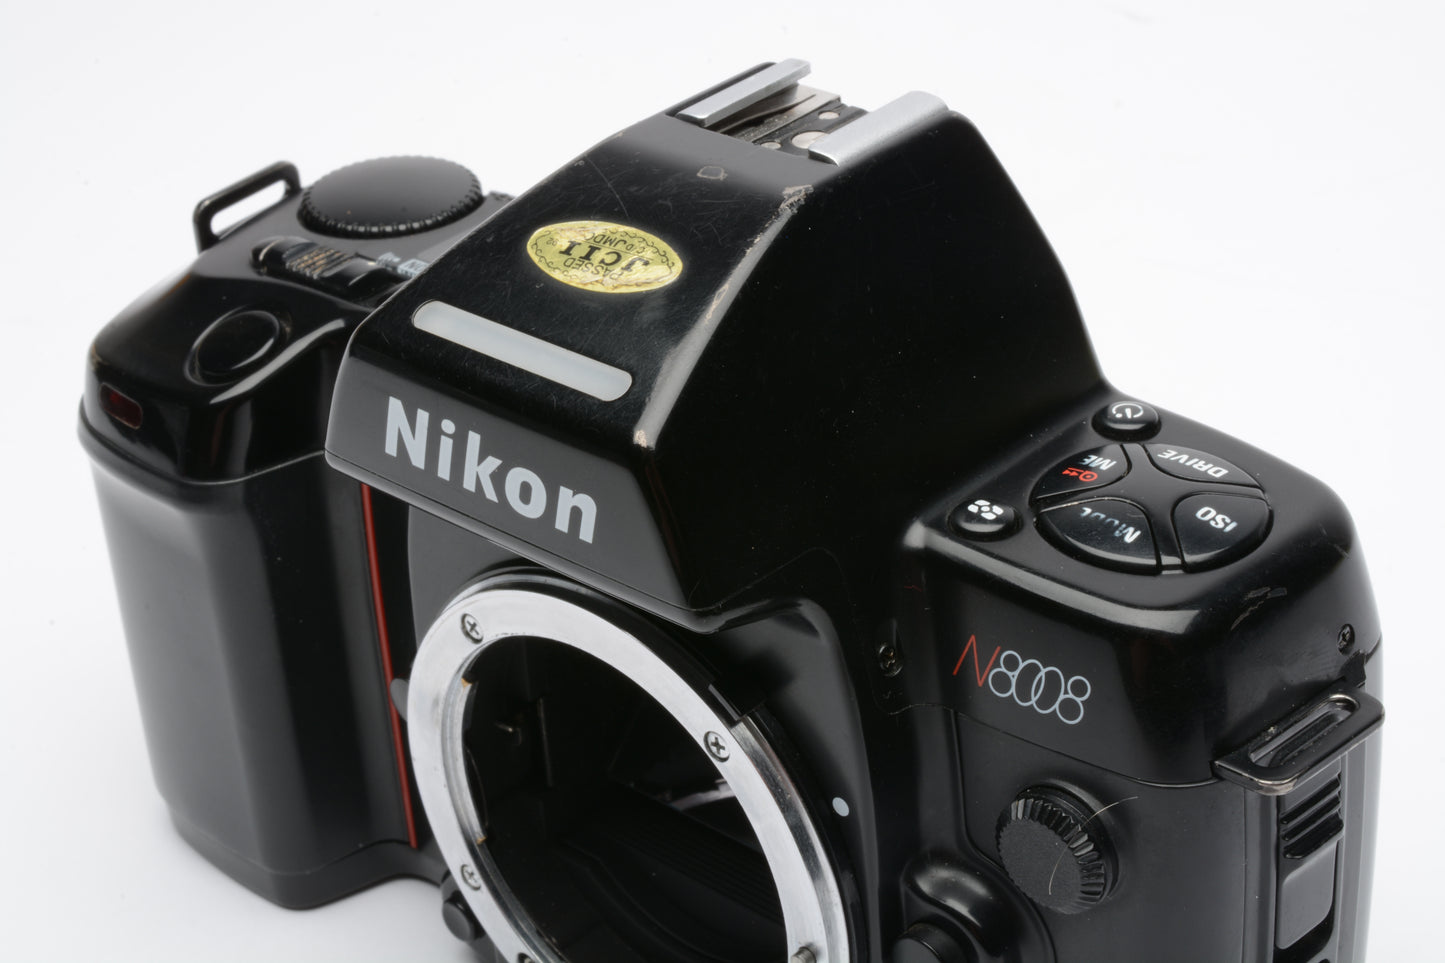 Nikon N8008 35mm SLR Body, cap, tested, great clean condition